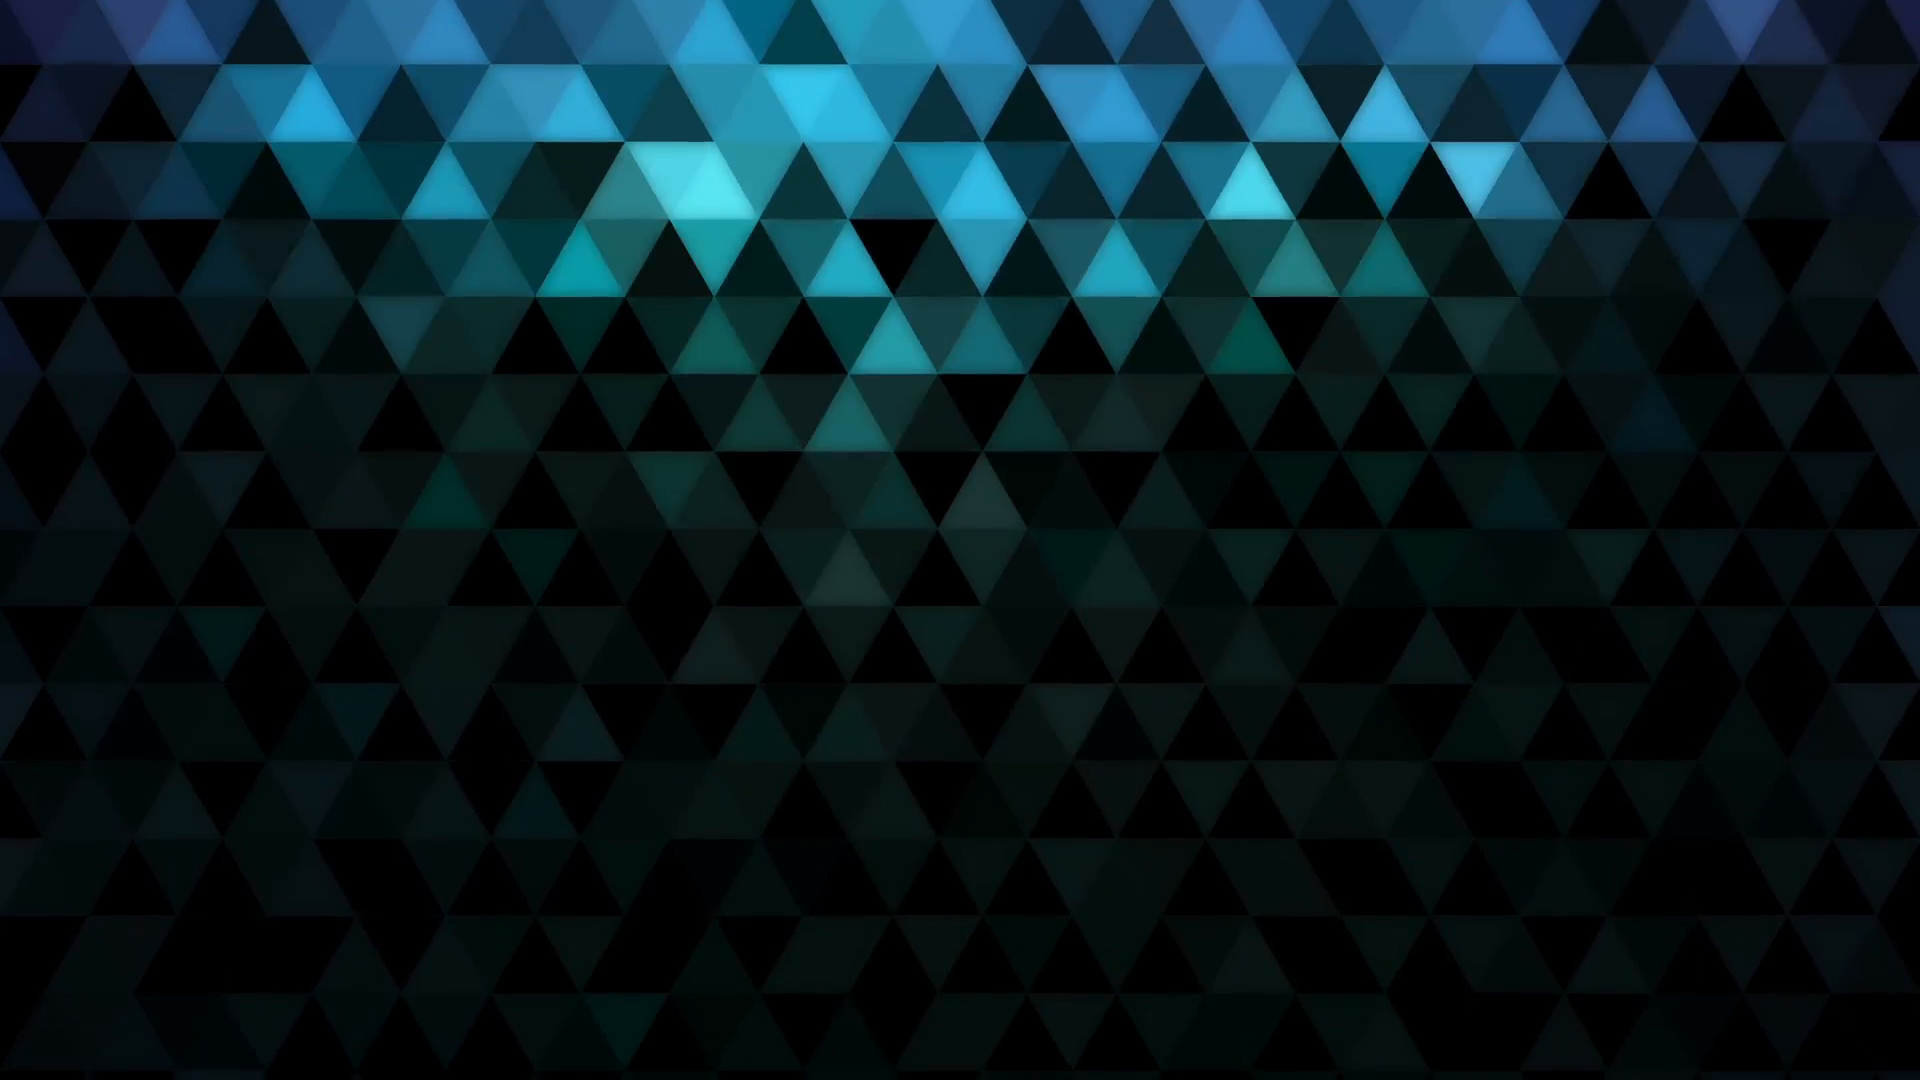 Abstract Pattern - Triangle - HD Wallpaper 